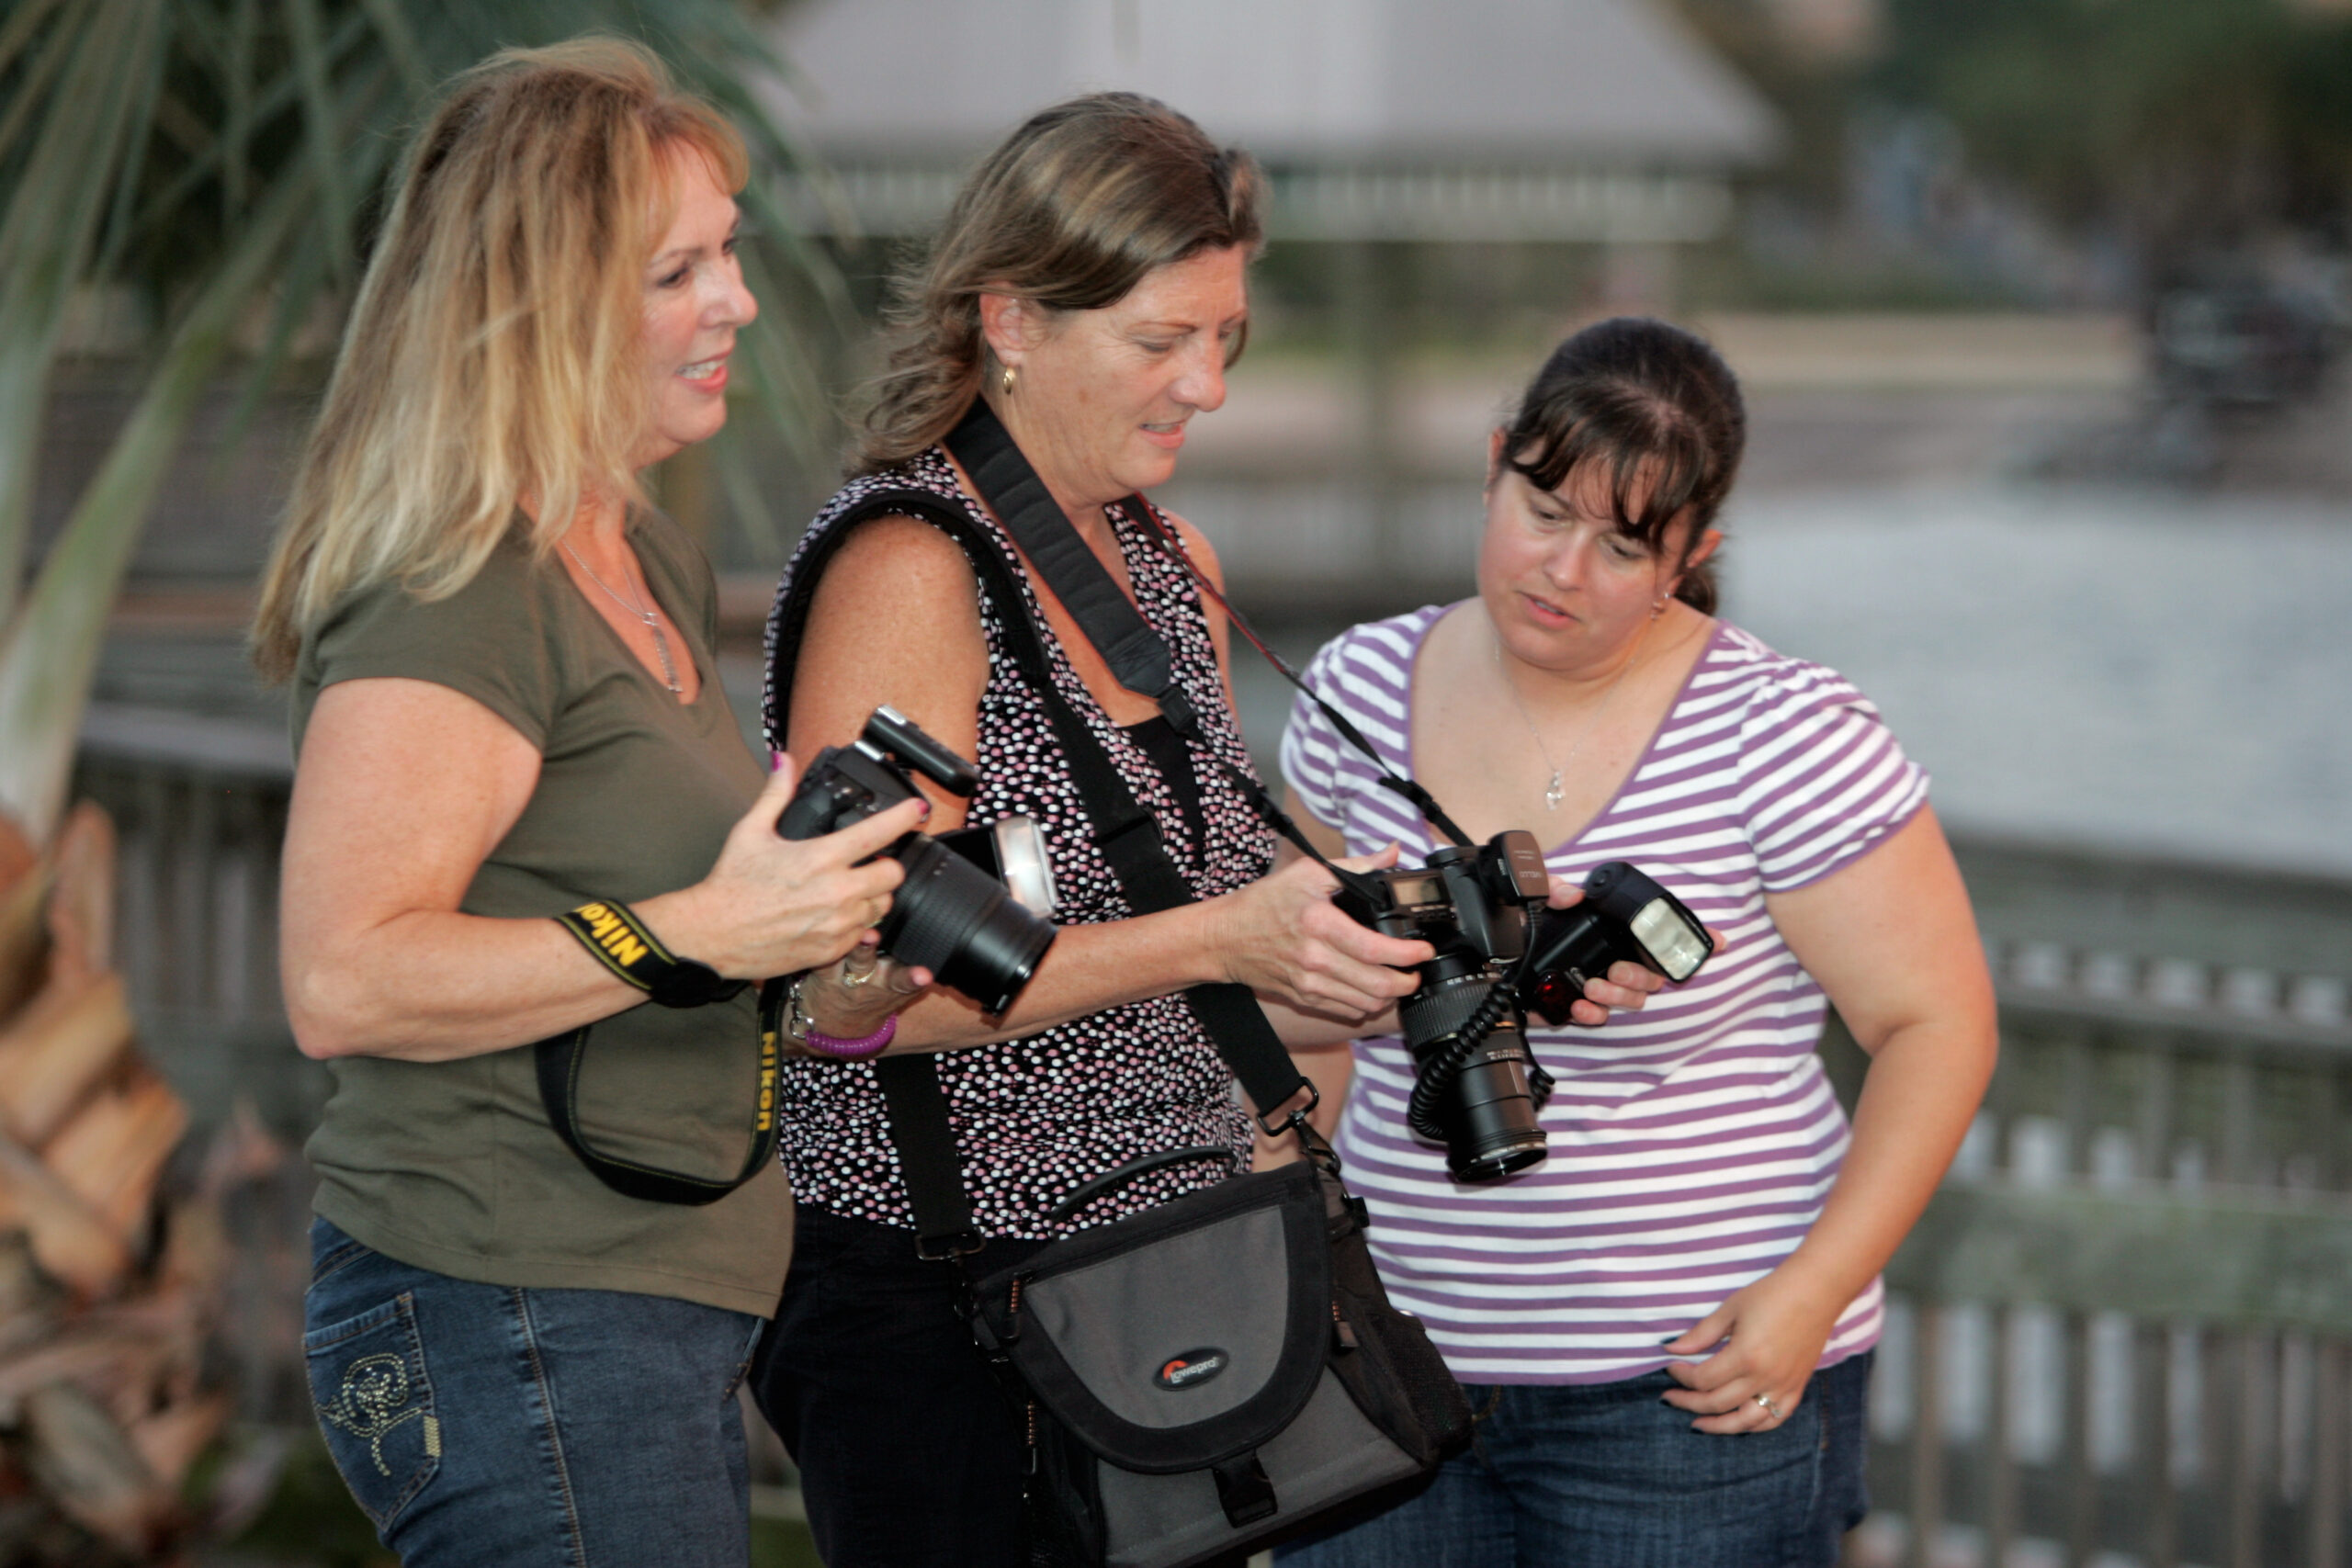 10/11/11 -- Port Orange, Fl -- Photo by Christina Stuart/Christina Stuart Photography  --  BCC PORTRAIT CLASS -- Brevard Community College portrait class during our On-Location photography class held in Cocoa Village, Florida on Tuesday, October 11, 2011.